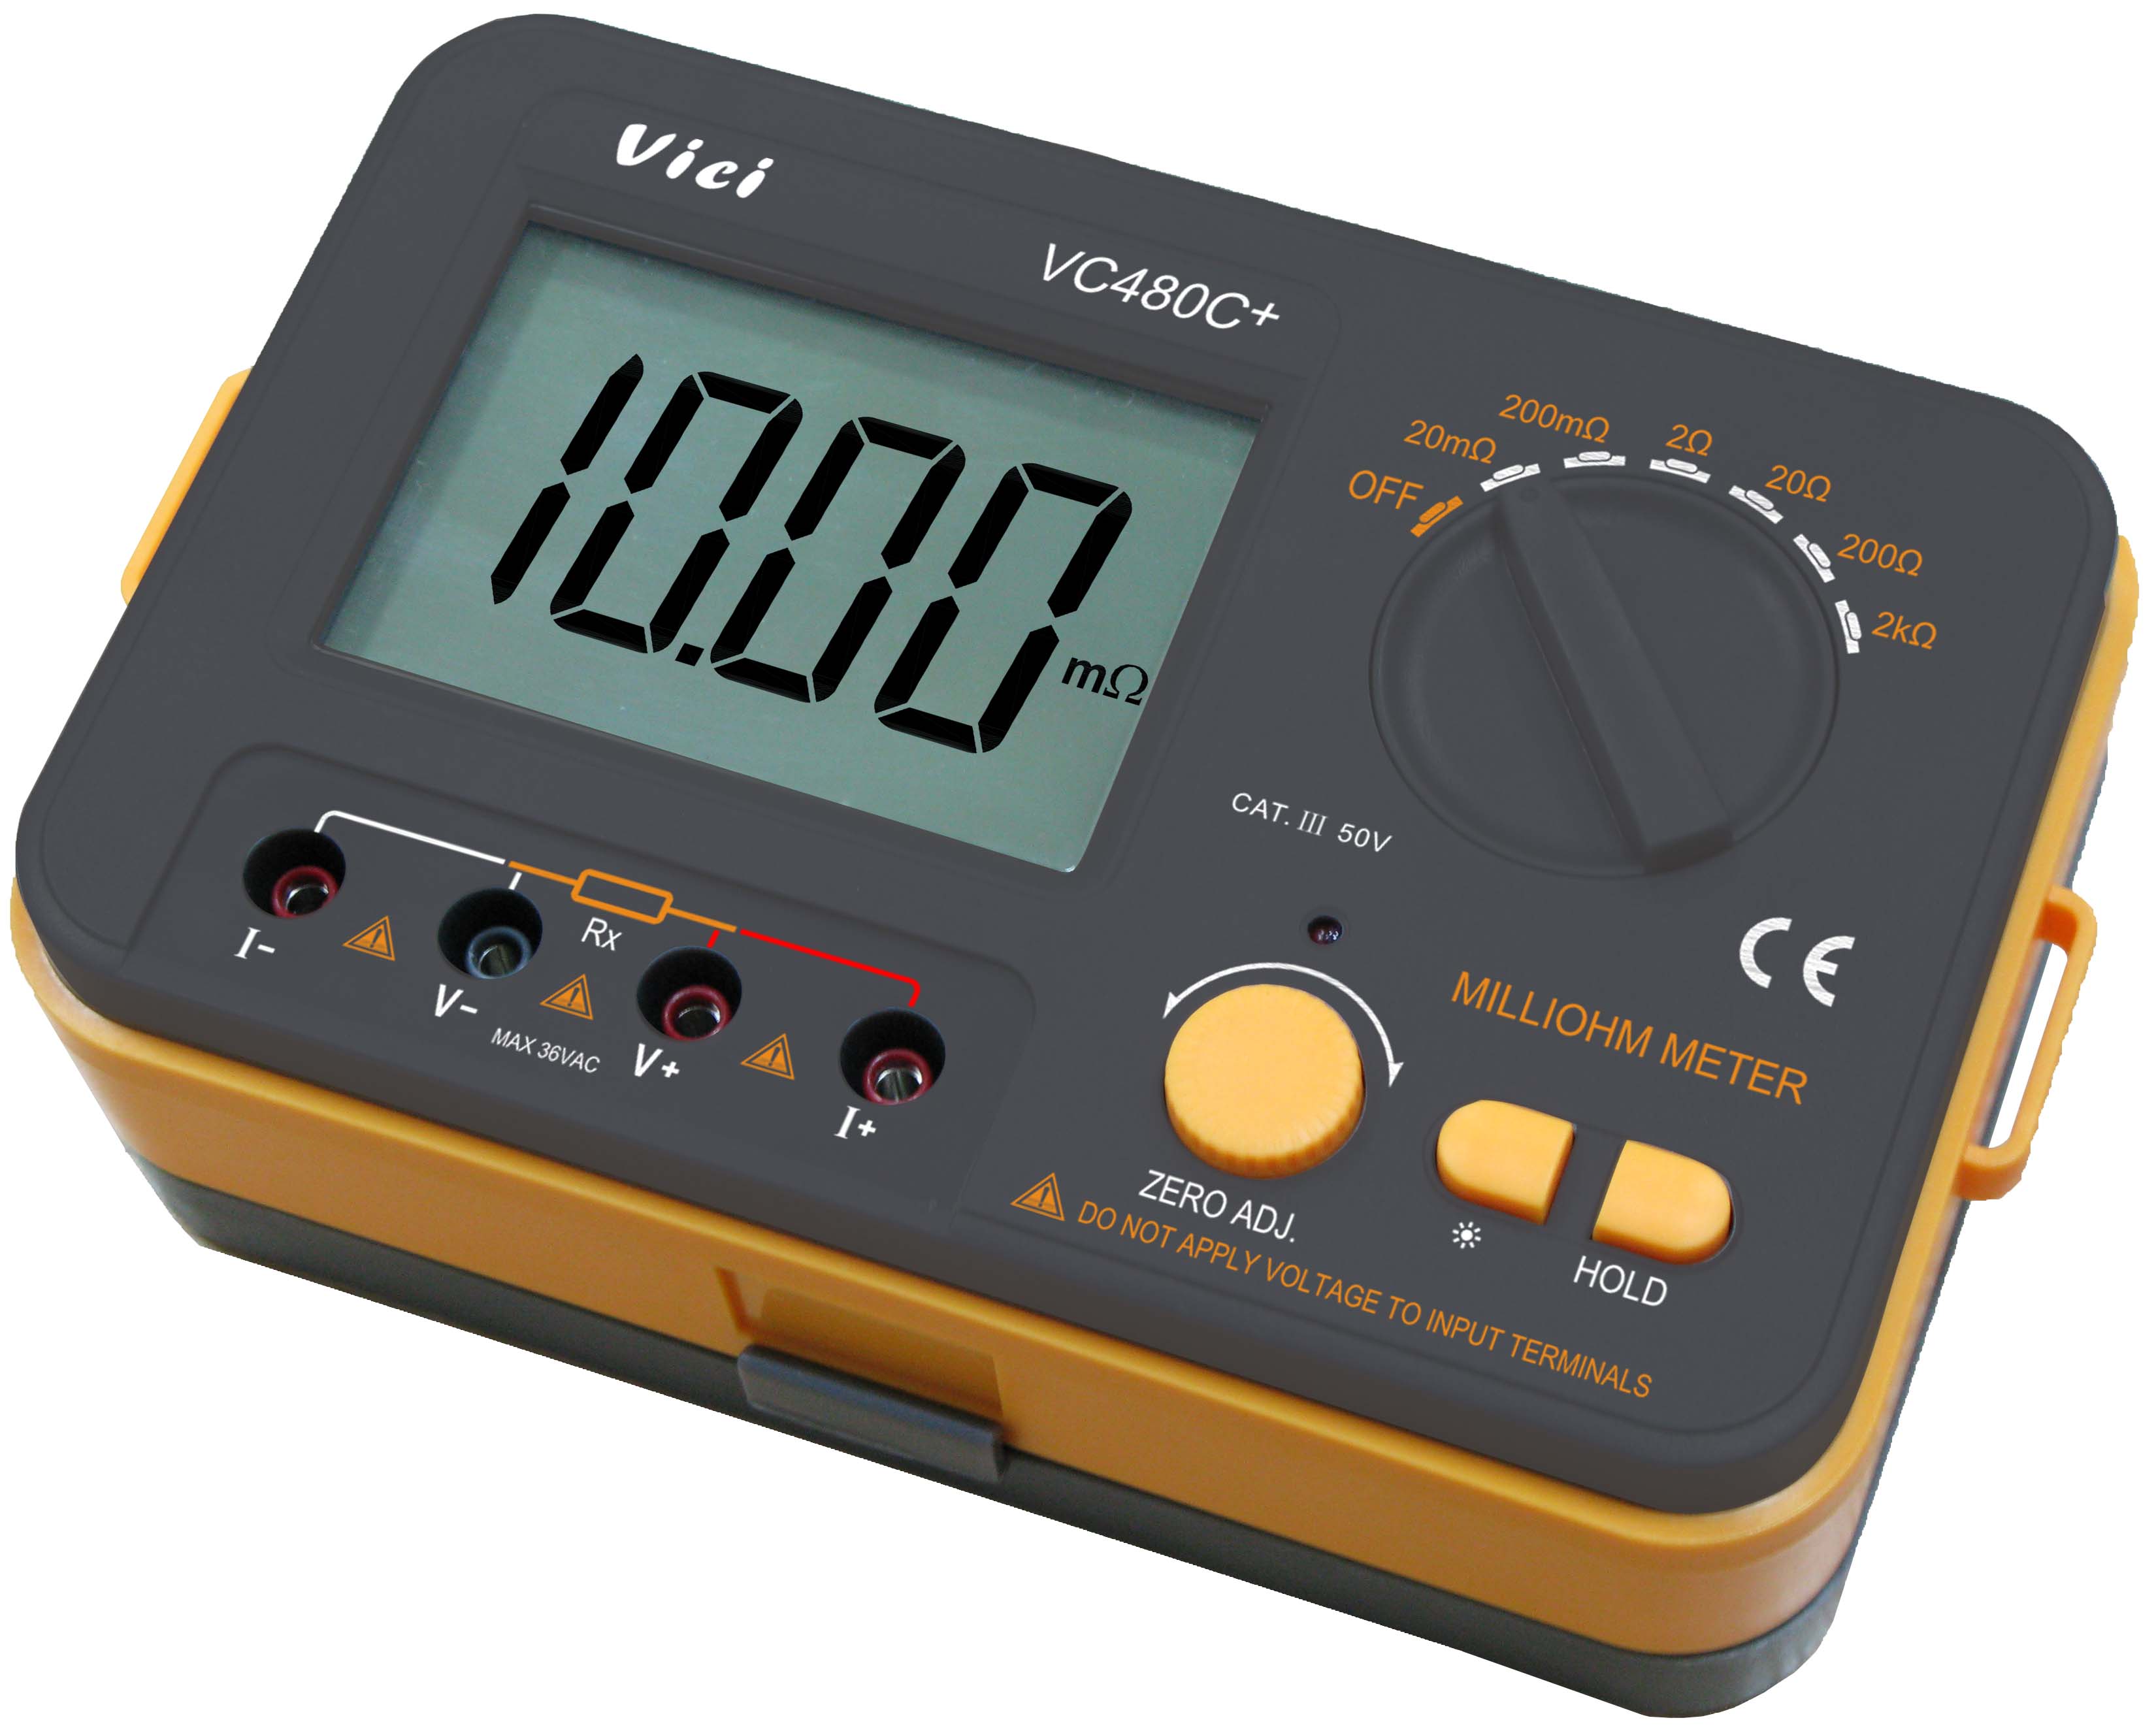 Milli-ohm Meter VC480C LCD Backlit 4 Wire Test Low Resistance